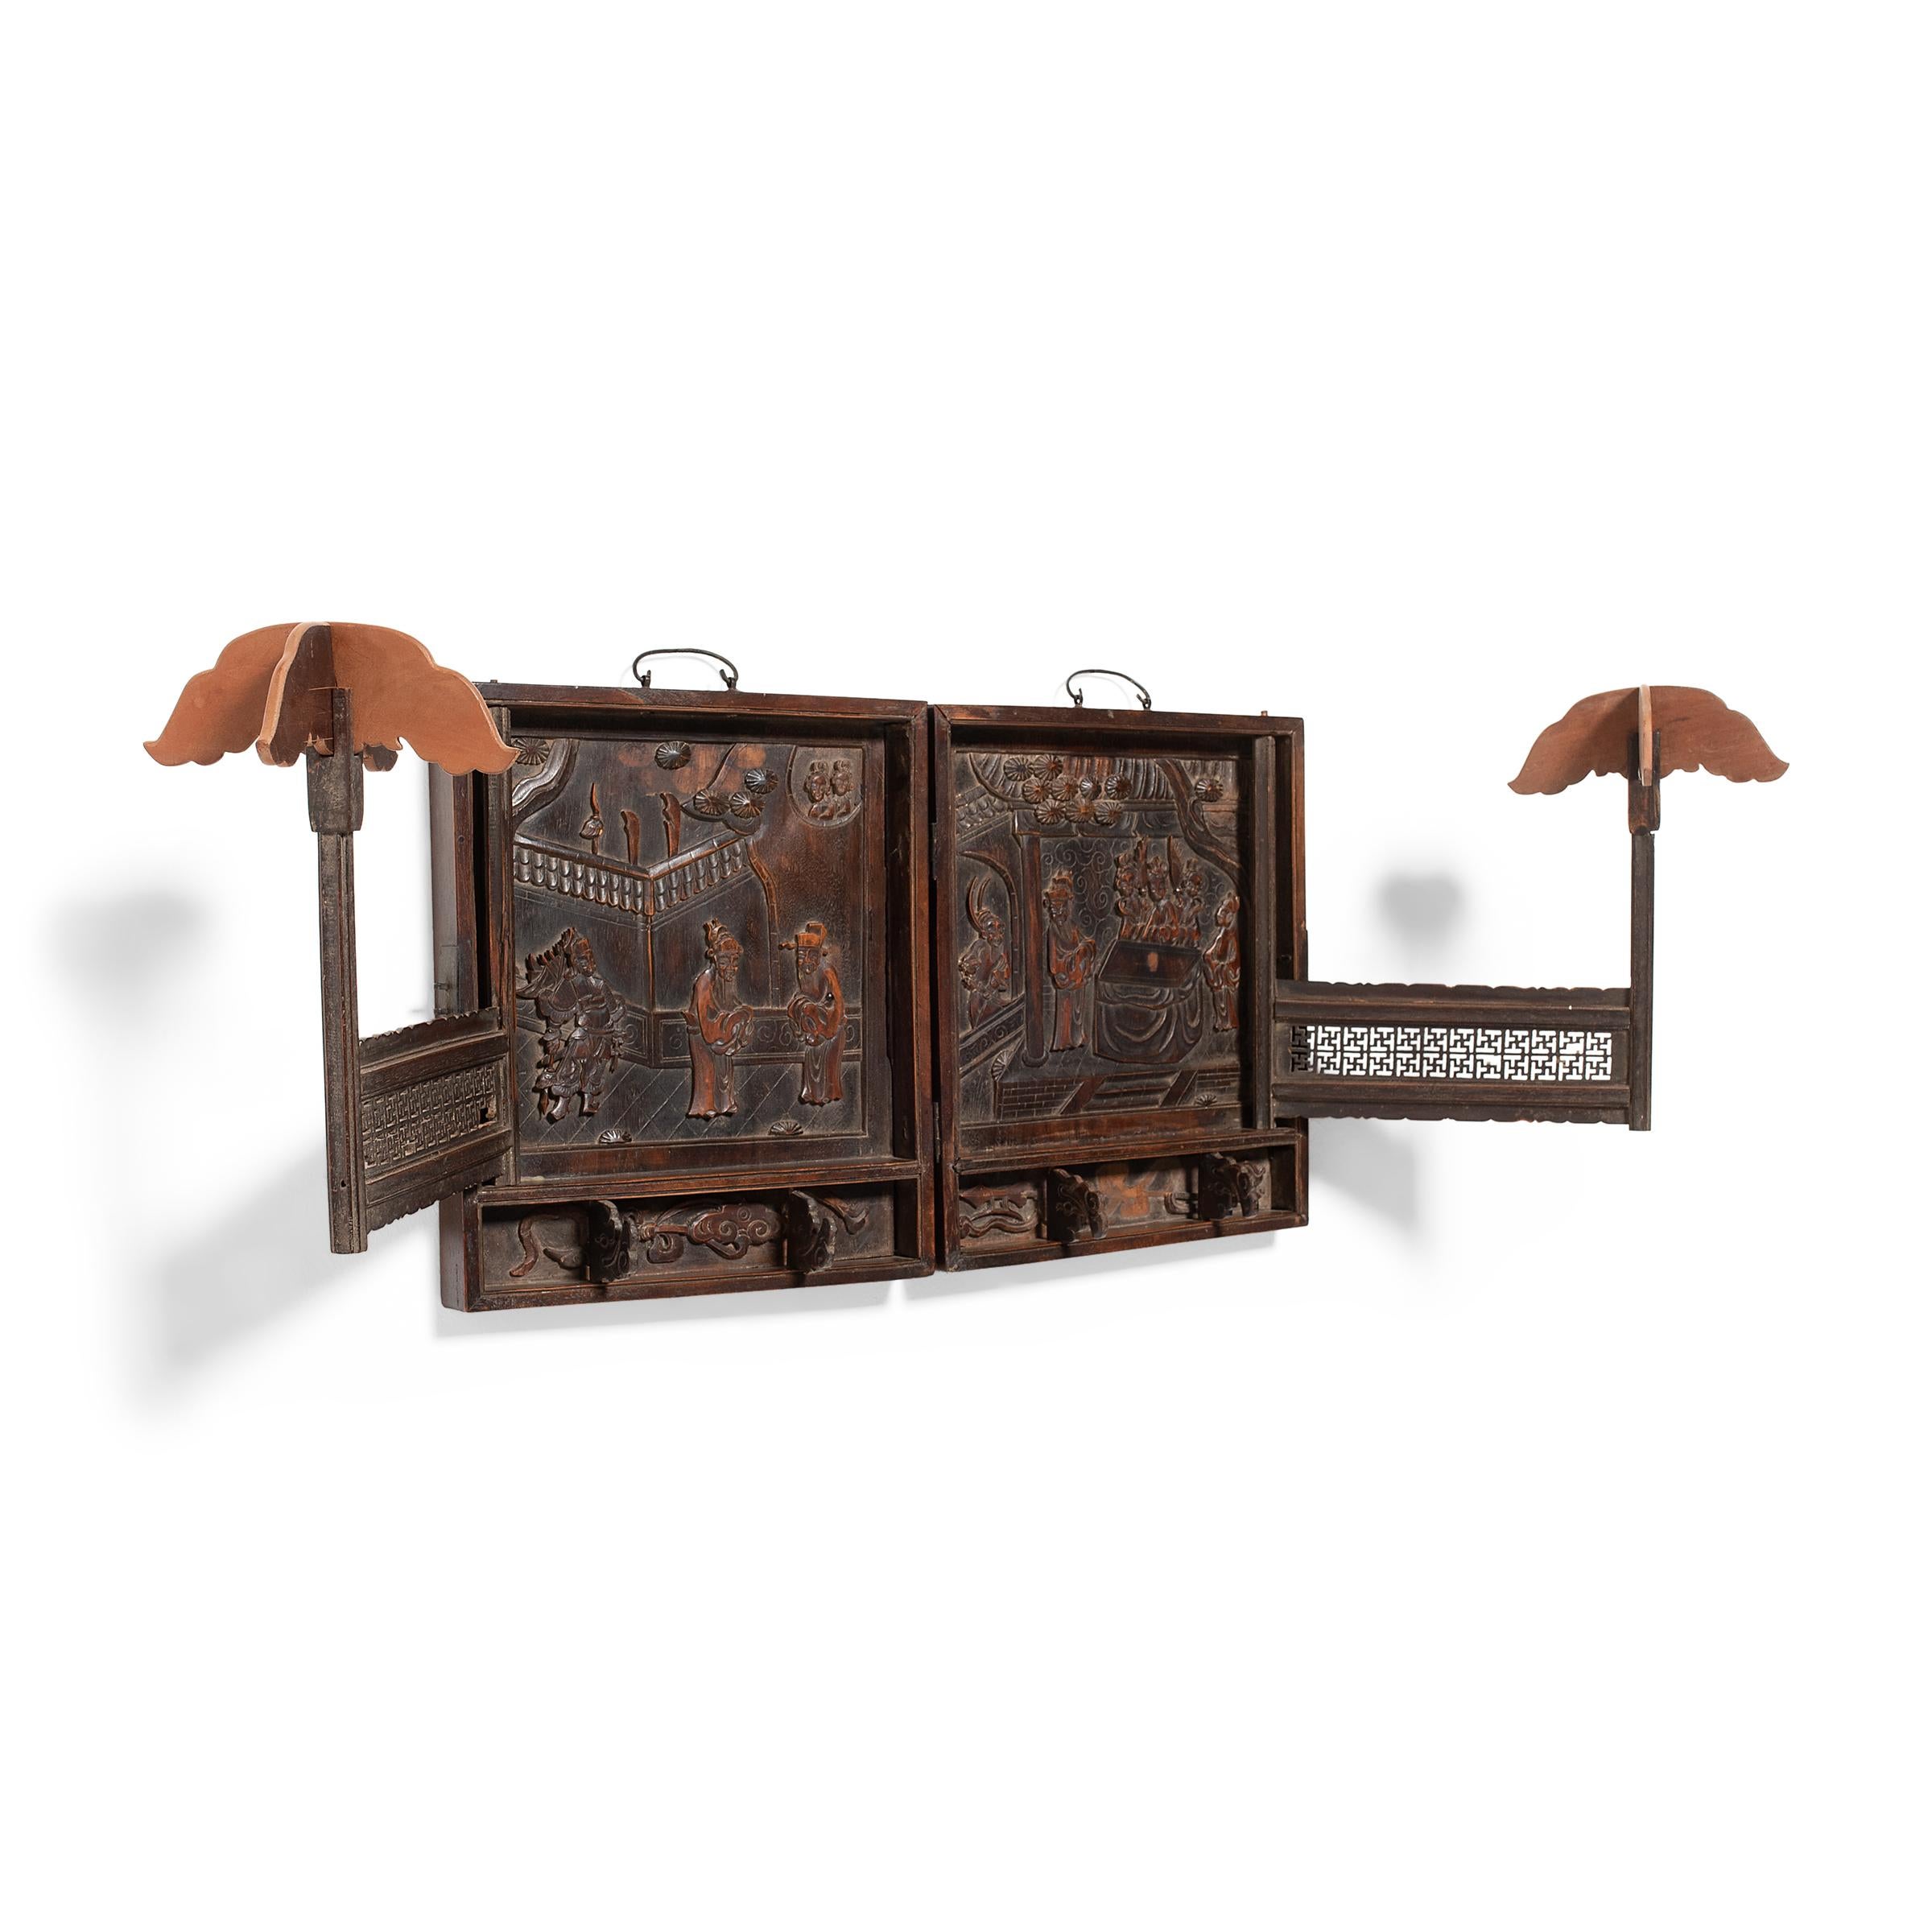 This folding hat rack displays the opulence of court fashion, where rank and status was expressed through fashion and its accouterments. During the Qing dynasty, wearing a hat was customary for any respectable man. When not in use, their hats were